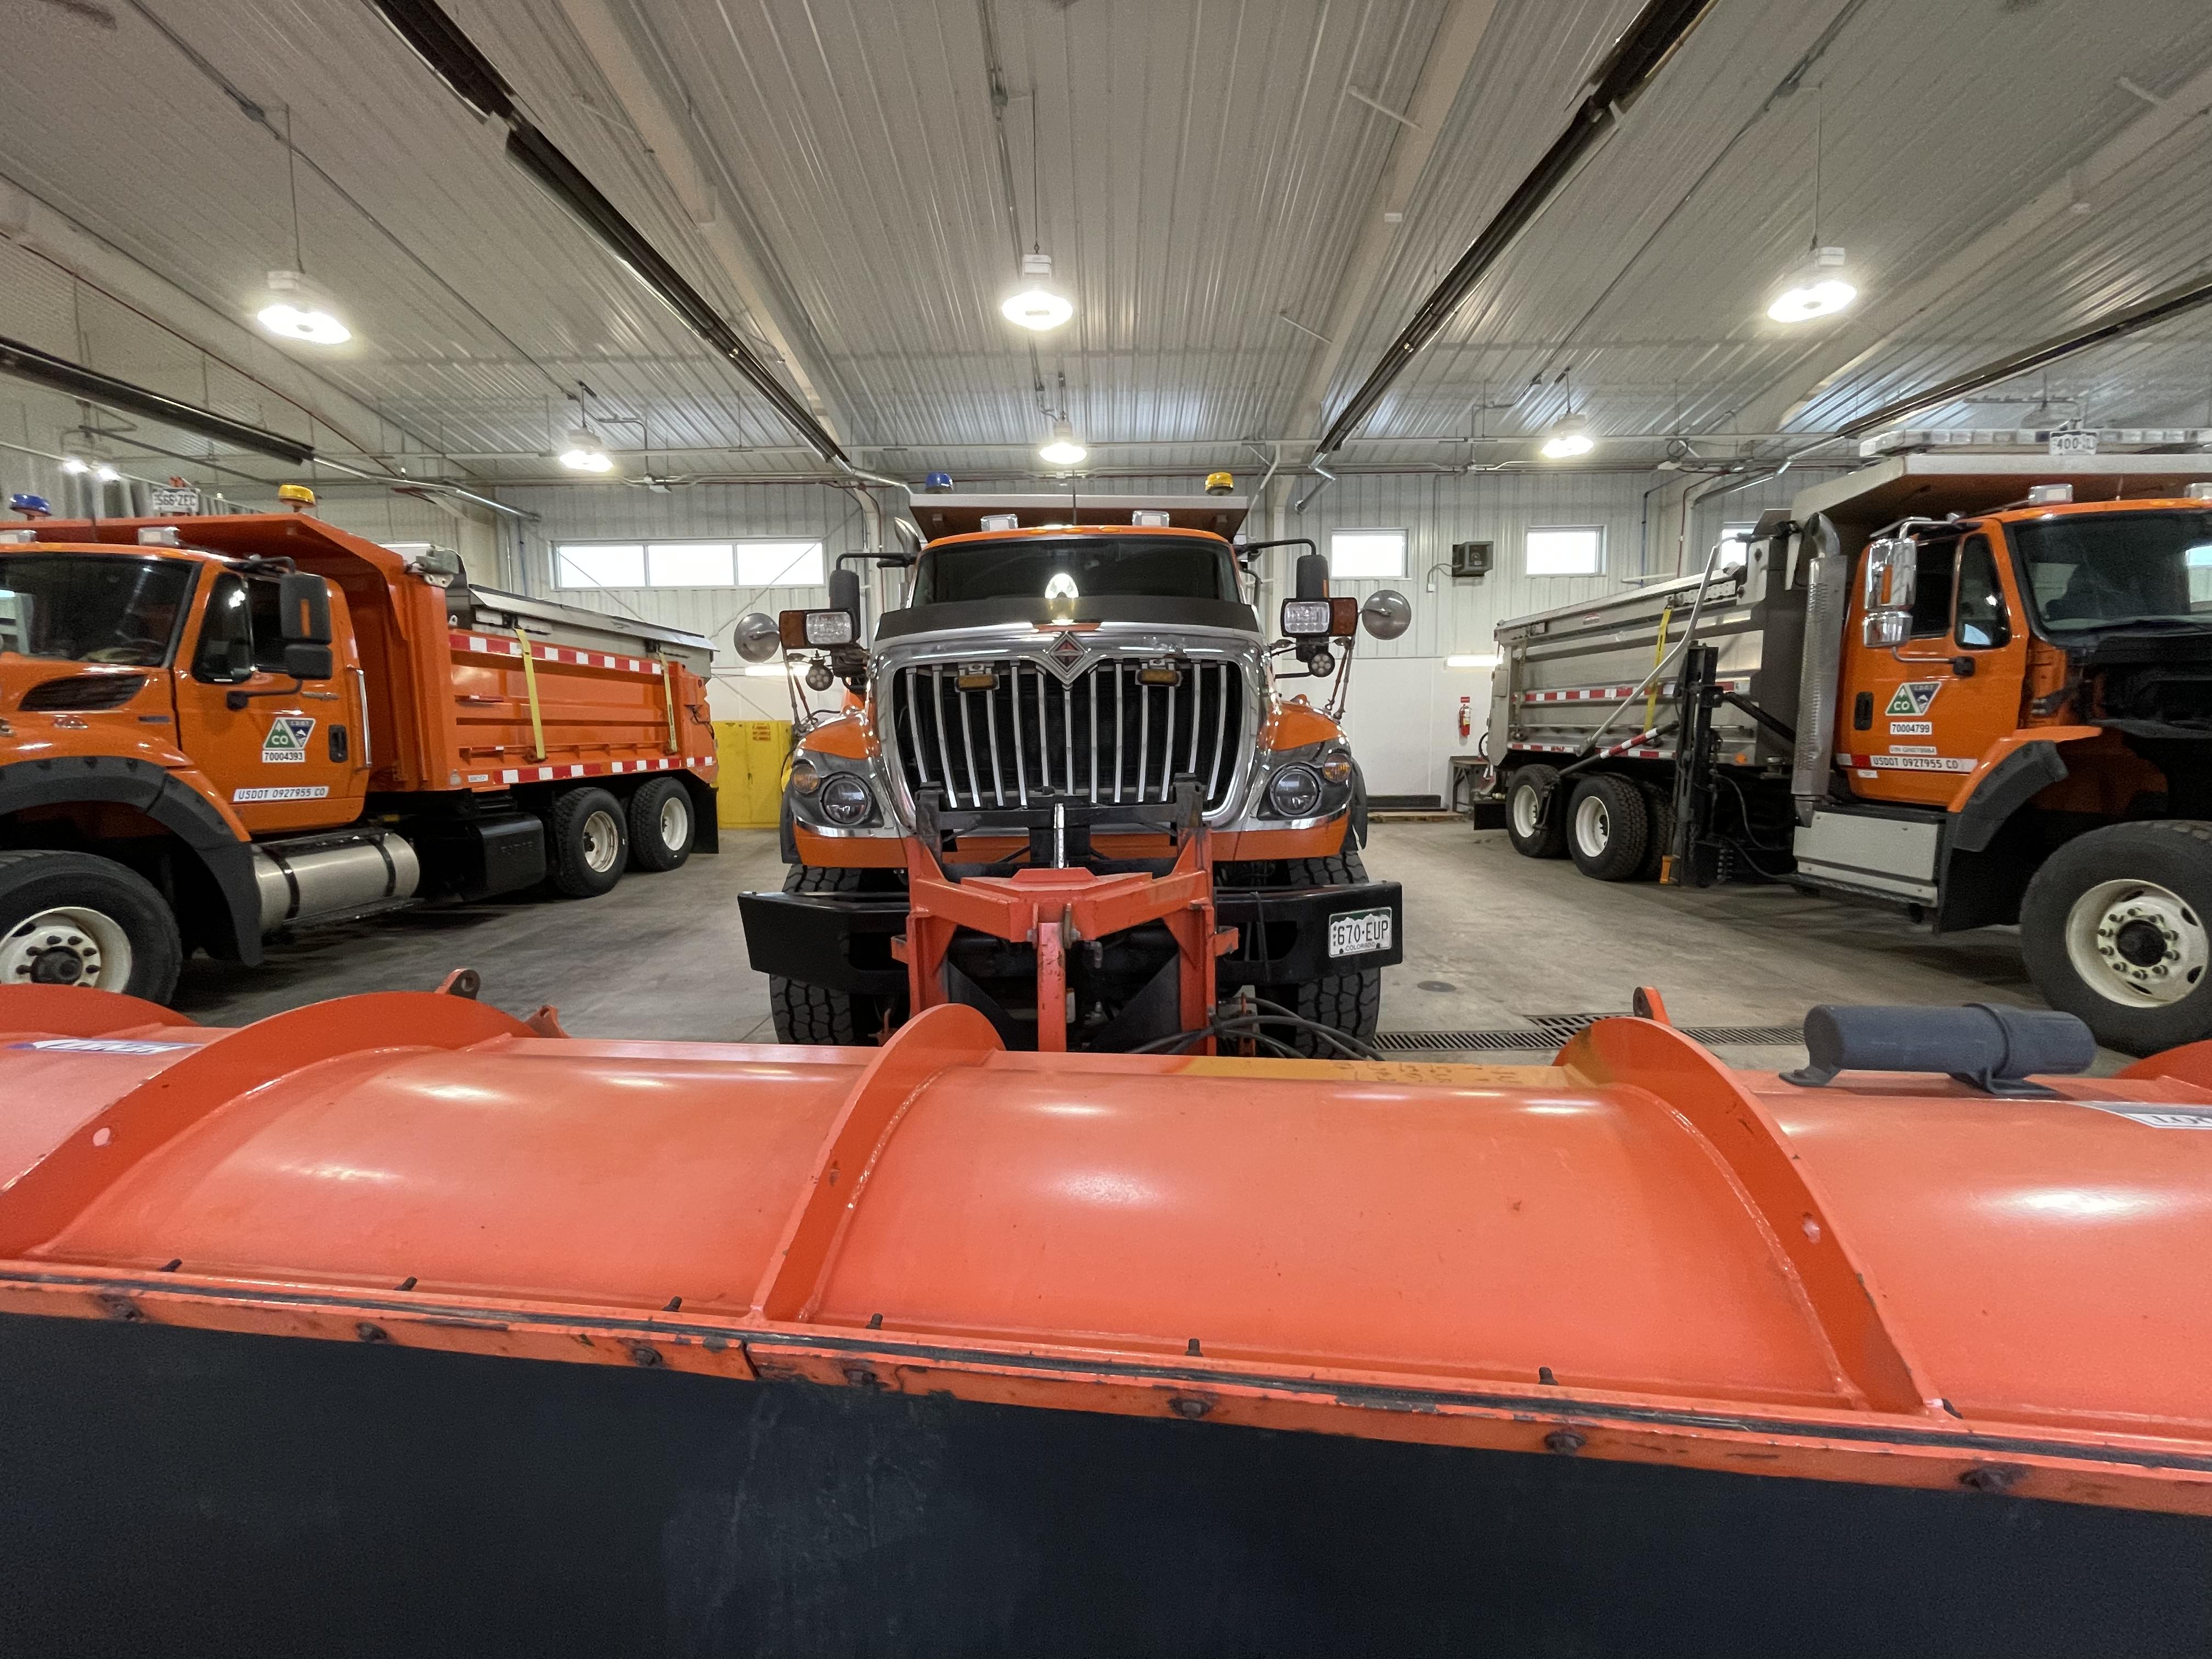 CDOT snowplows lined up and ready for winter operations